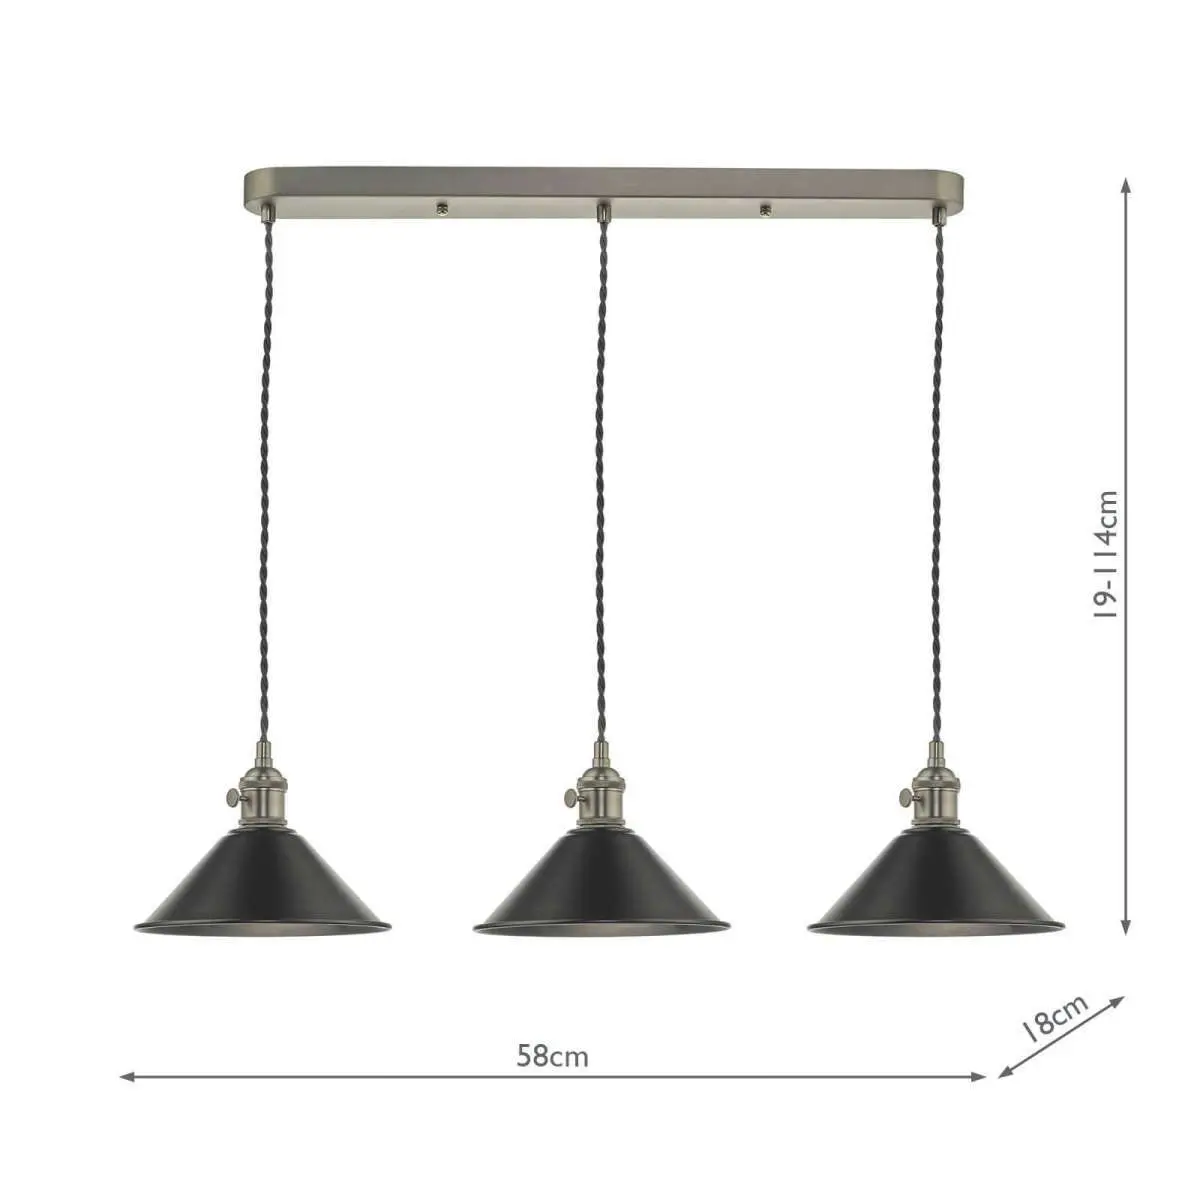 Hadano 3 Light Suspension in Antique Chrome With Antique Pewter Shades